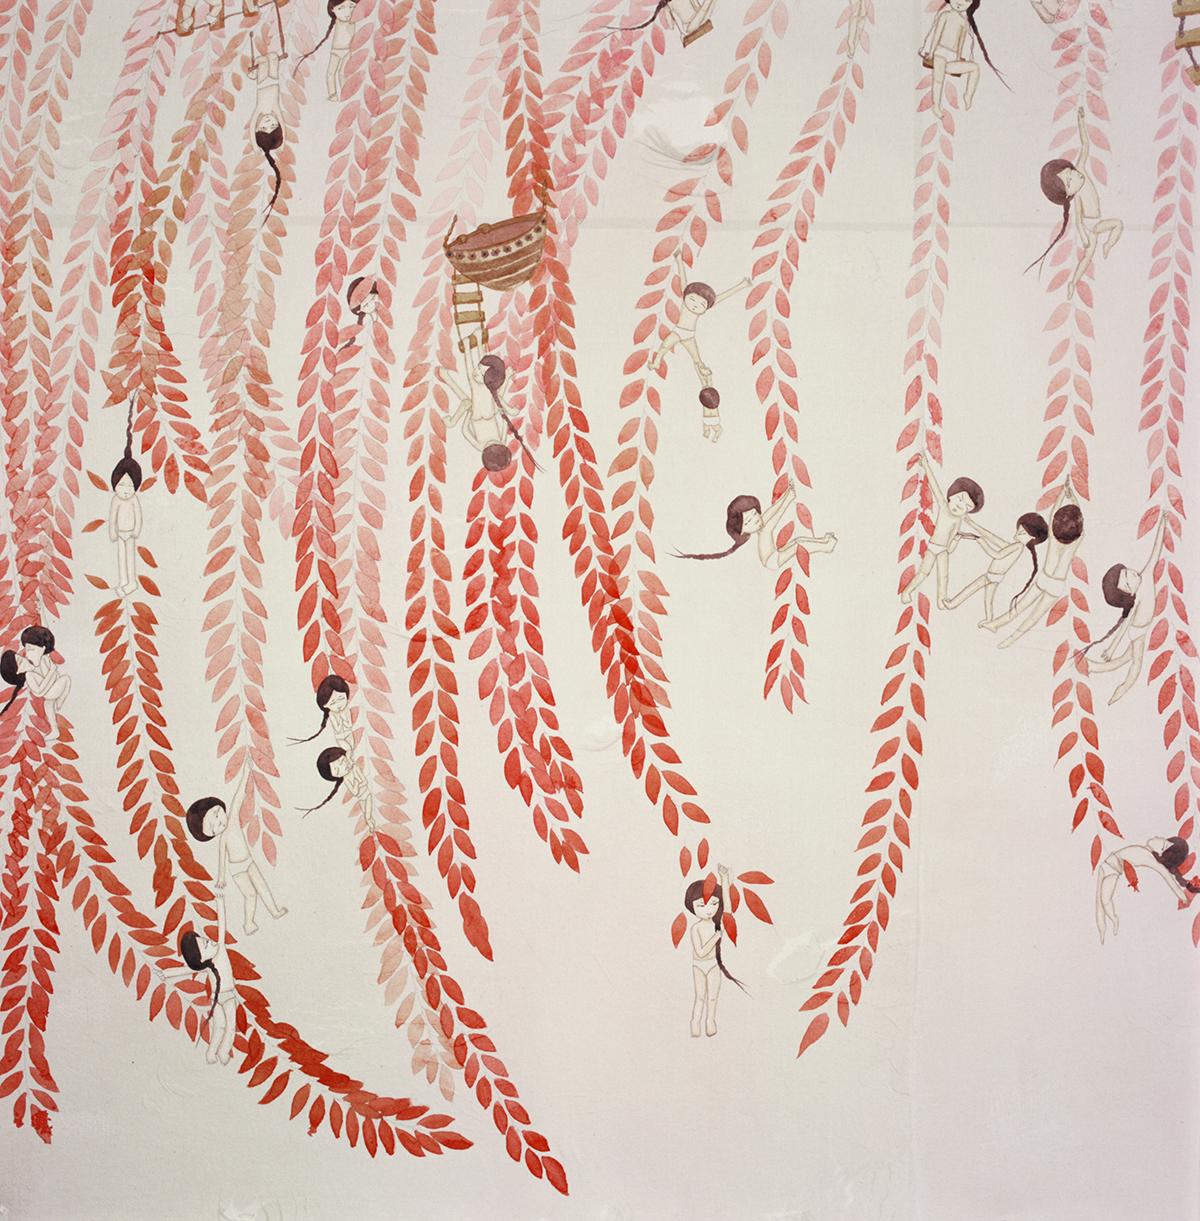 Detail of artwork by Kyung Jeon titled a weeping willow, 2009, Pencil and watercolor on rice paper on canvas, 61.5 x 78.25 inches, 156.2 x 198.8 cm